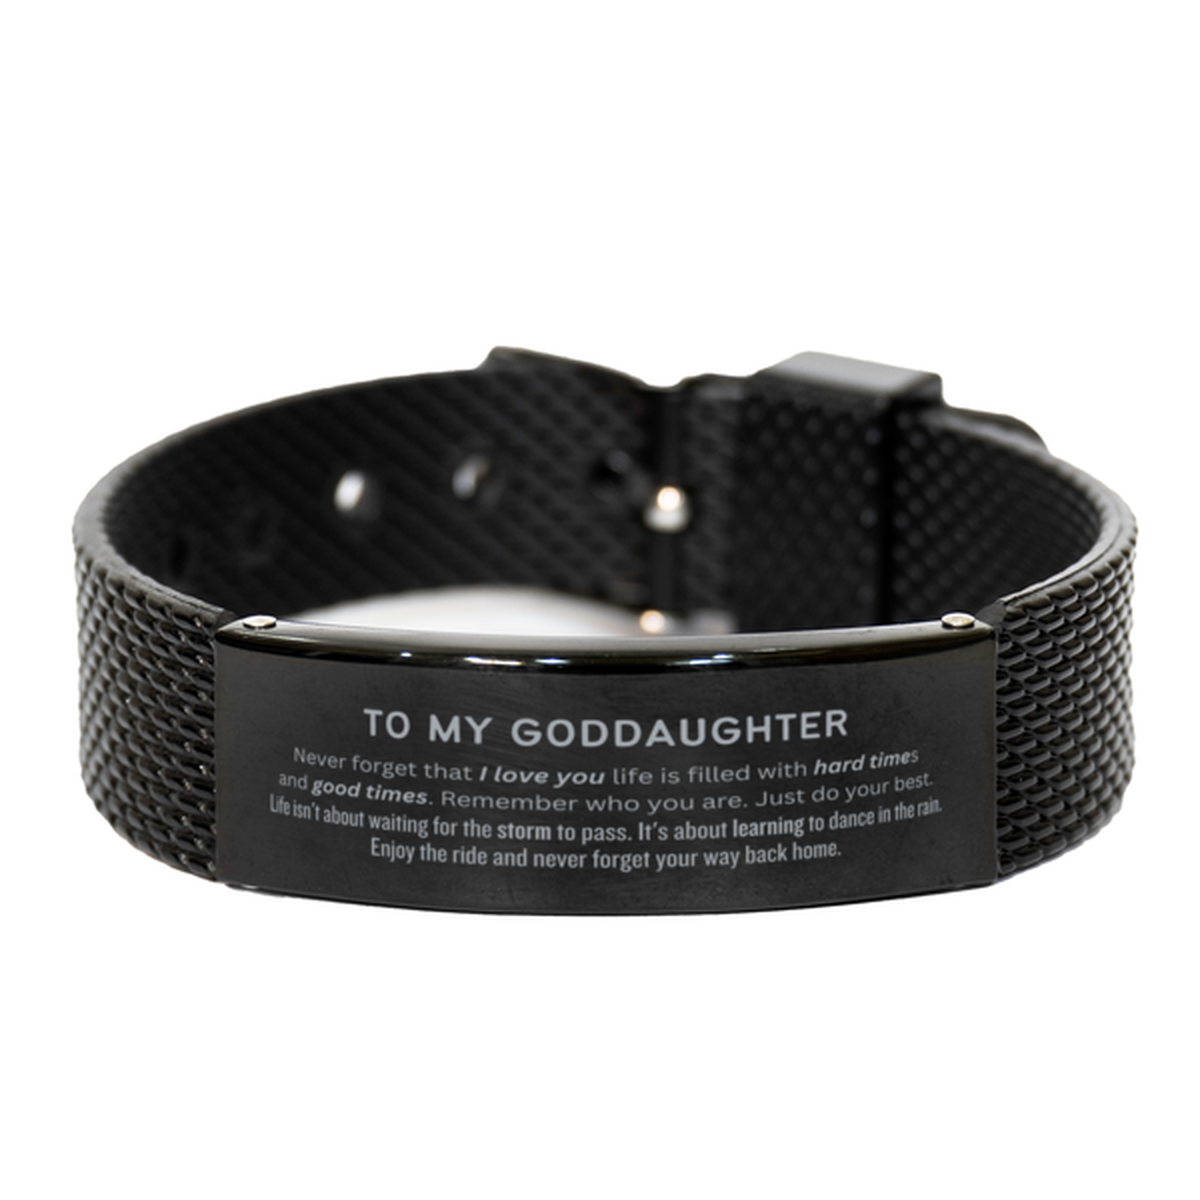 Christmas Goddaughter Black Shark Mesh Bracelet Gifts, To My Goddaughter Birthday Thank You Gifts For Goddaughter, Graduation Unique Gifts For Goddaughter To My Goddaughter Never forget that I love you life is filled with hard times and good times. Rememb